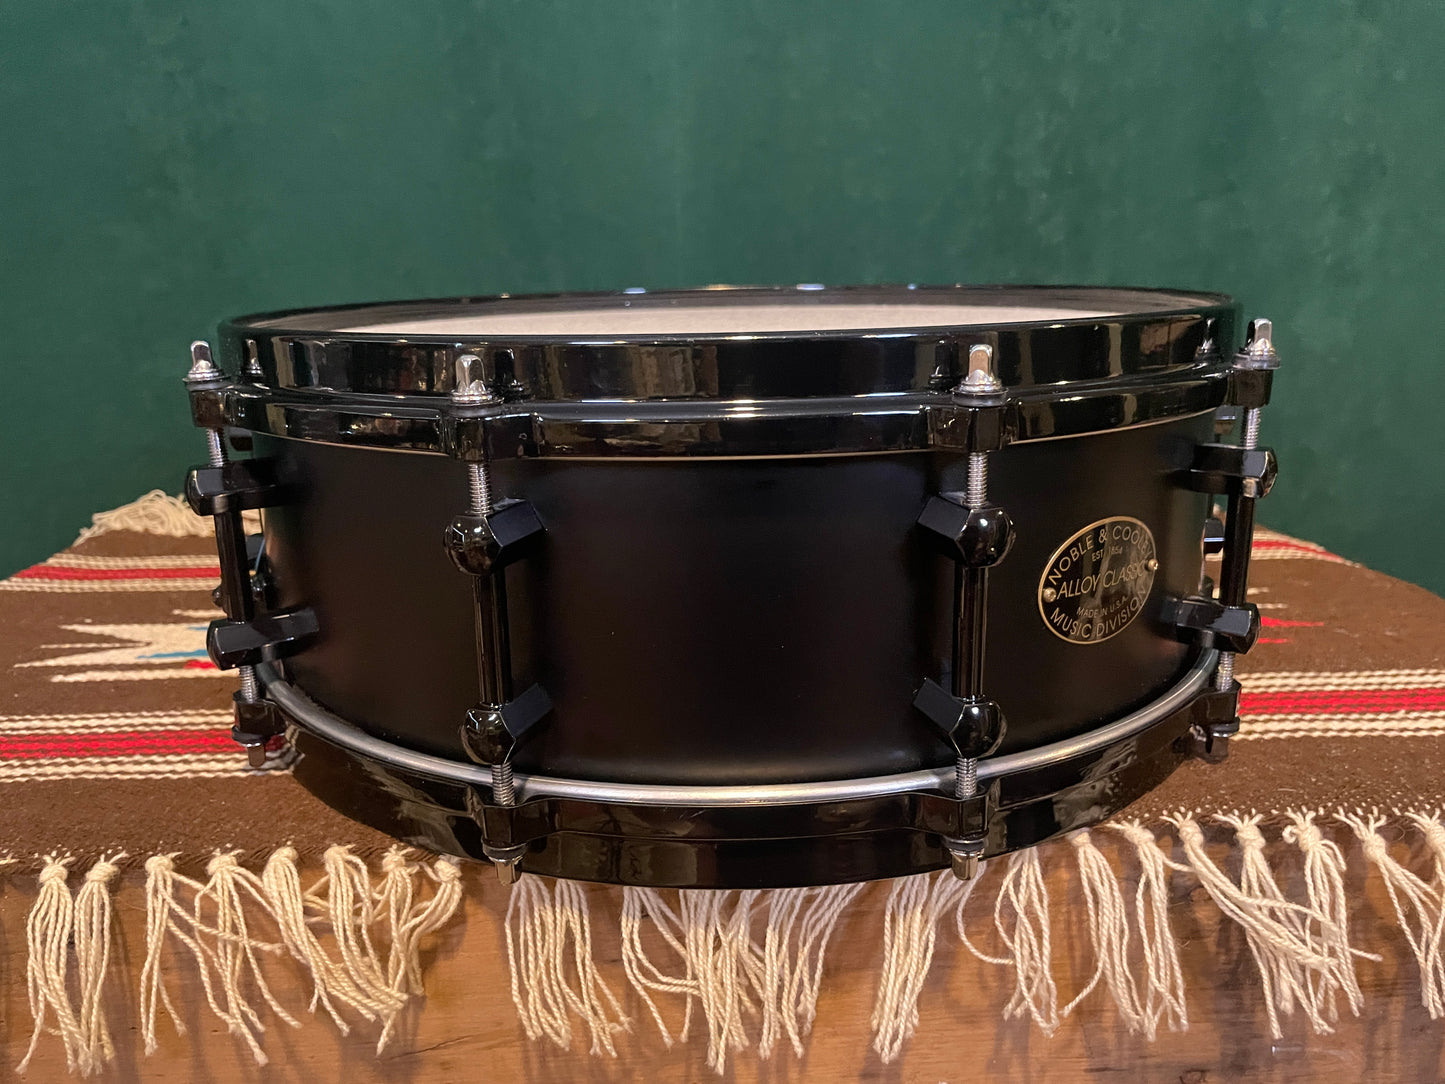 Noble & Cooley 4.75x14 Alloy Classic Snare Drum Black